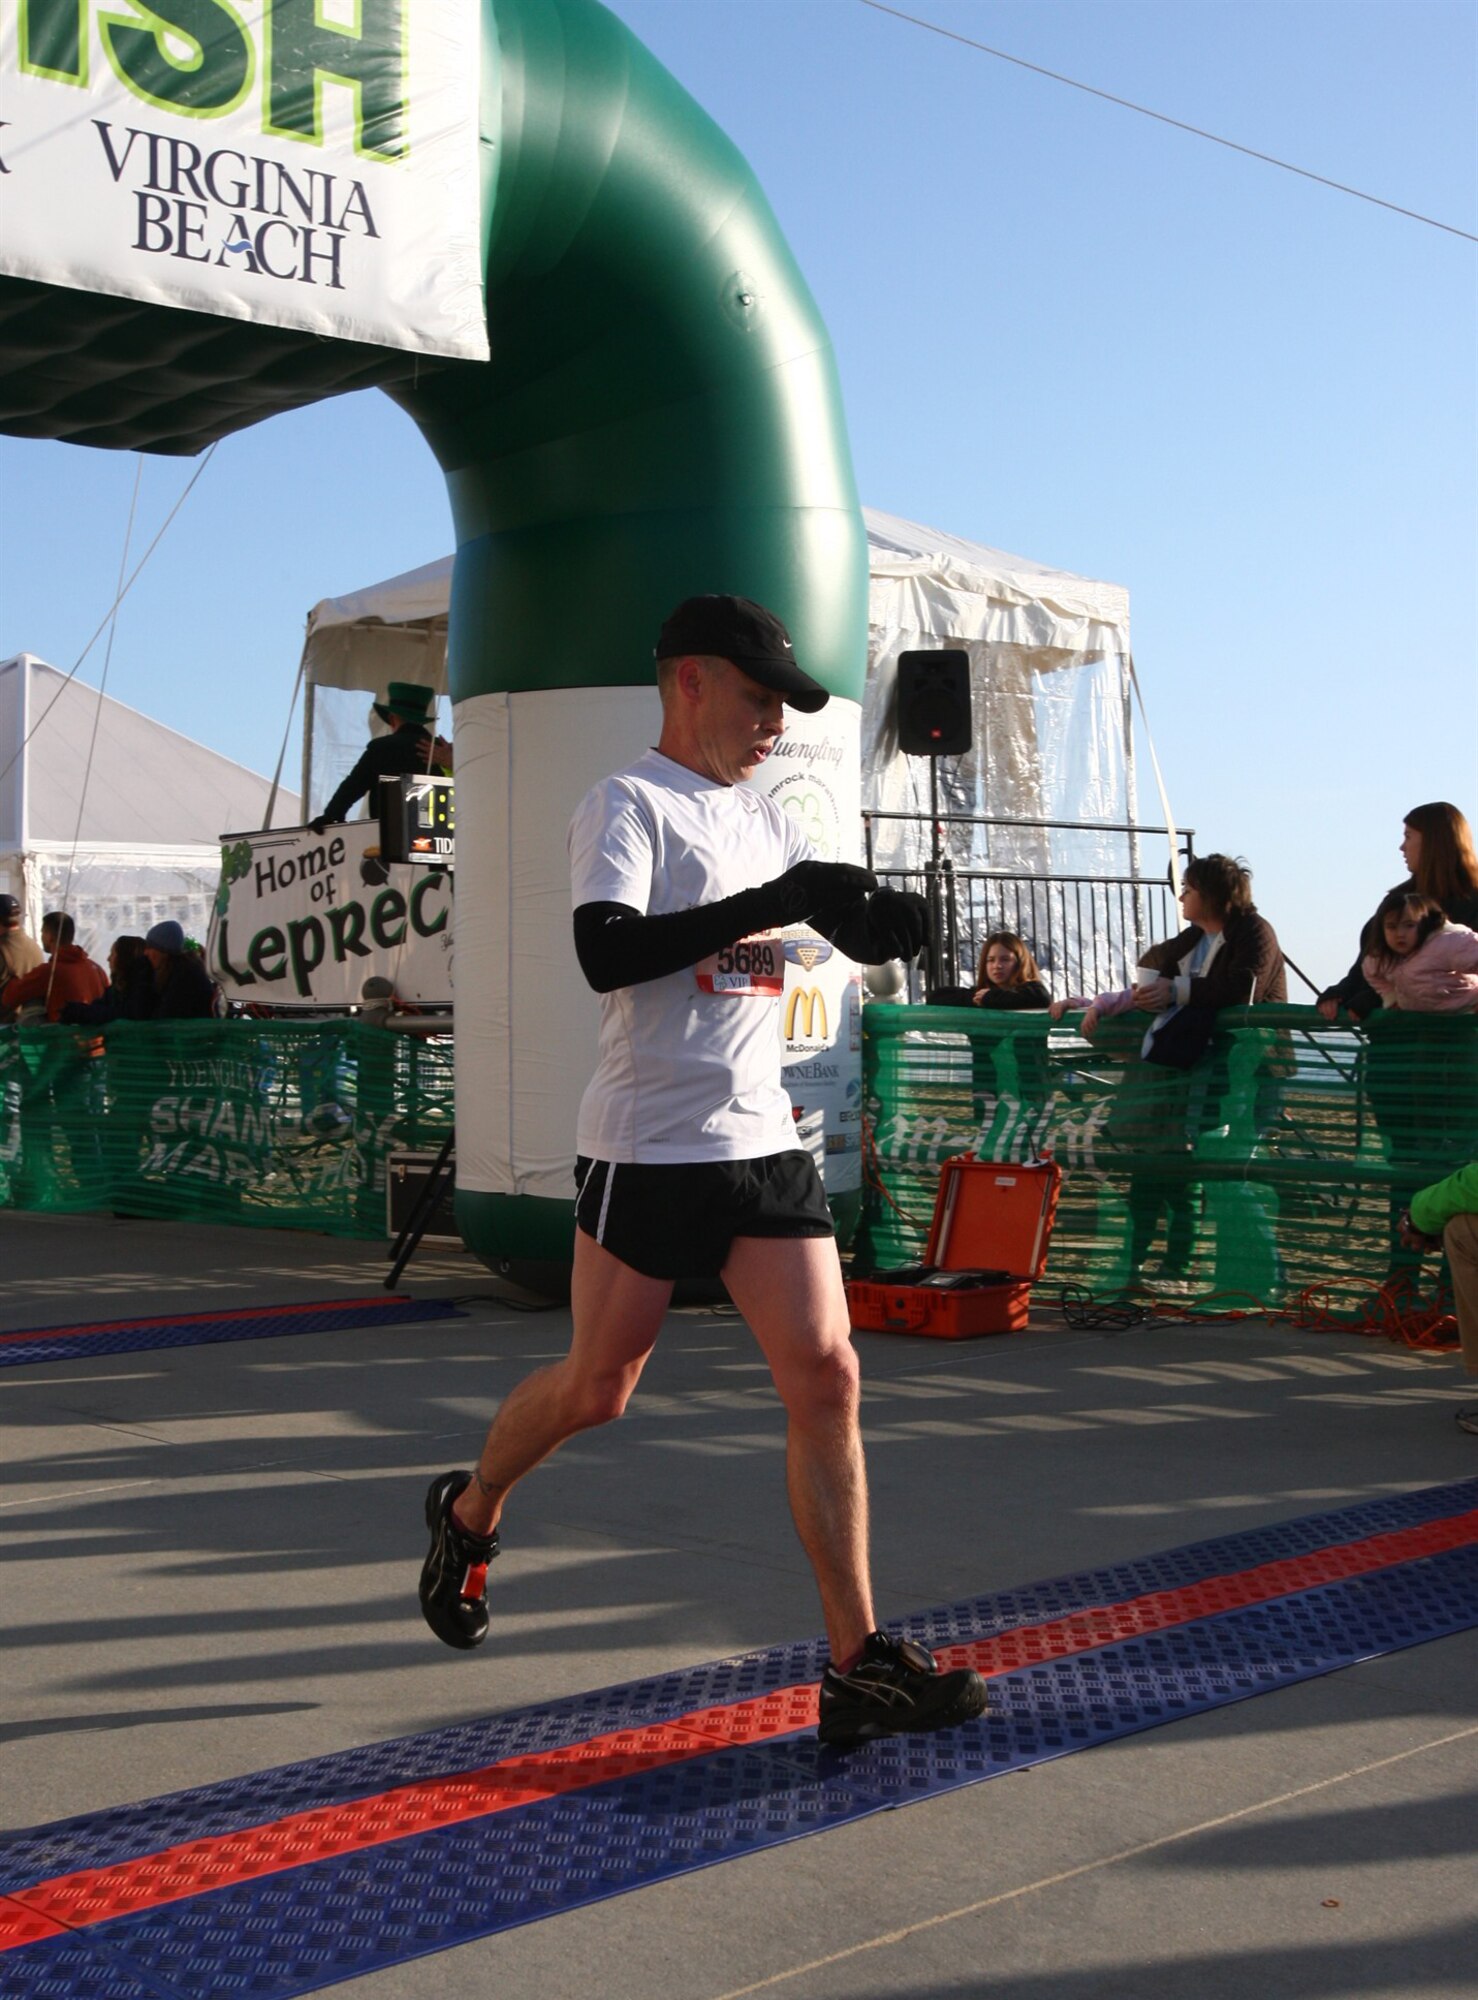 Master Sgt. James Richardson crosses the finish line and monitors his stopwatch for the time spent during the half Shamrock Marathon recently held in Norfolk, Va.  Sergeant Richardson, 65th SFS and 65th LRS first sergeant, is currently preparing to represent the United States Air Forces in Europe as the only delegate from Lajes in the upcoming 2009 Air Force Marathon. (U.S. Air Force courtesy photo)